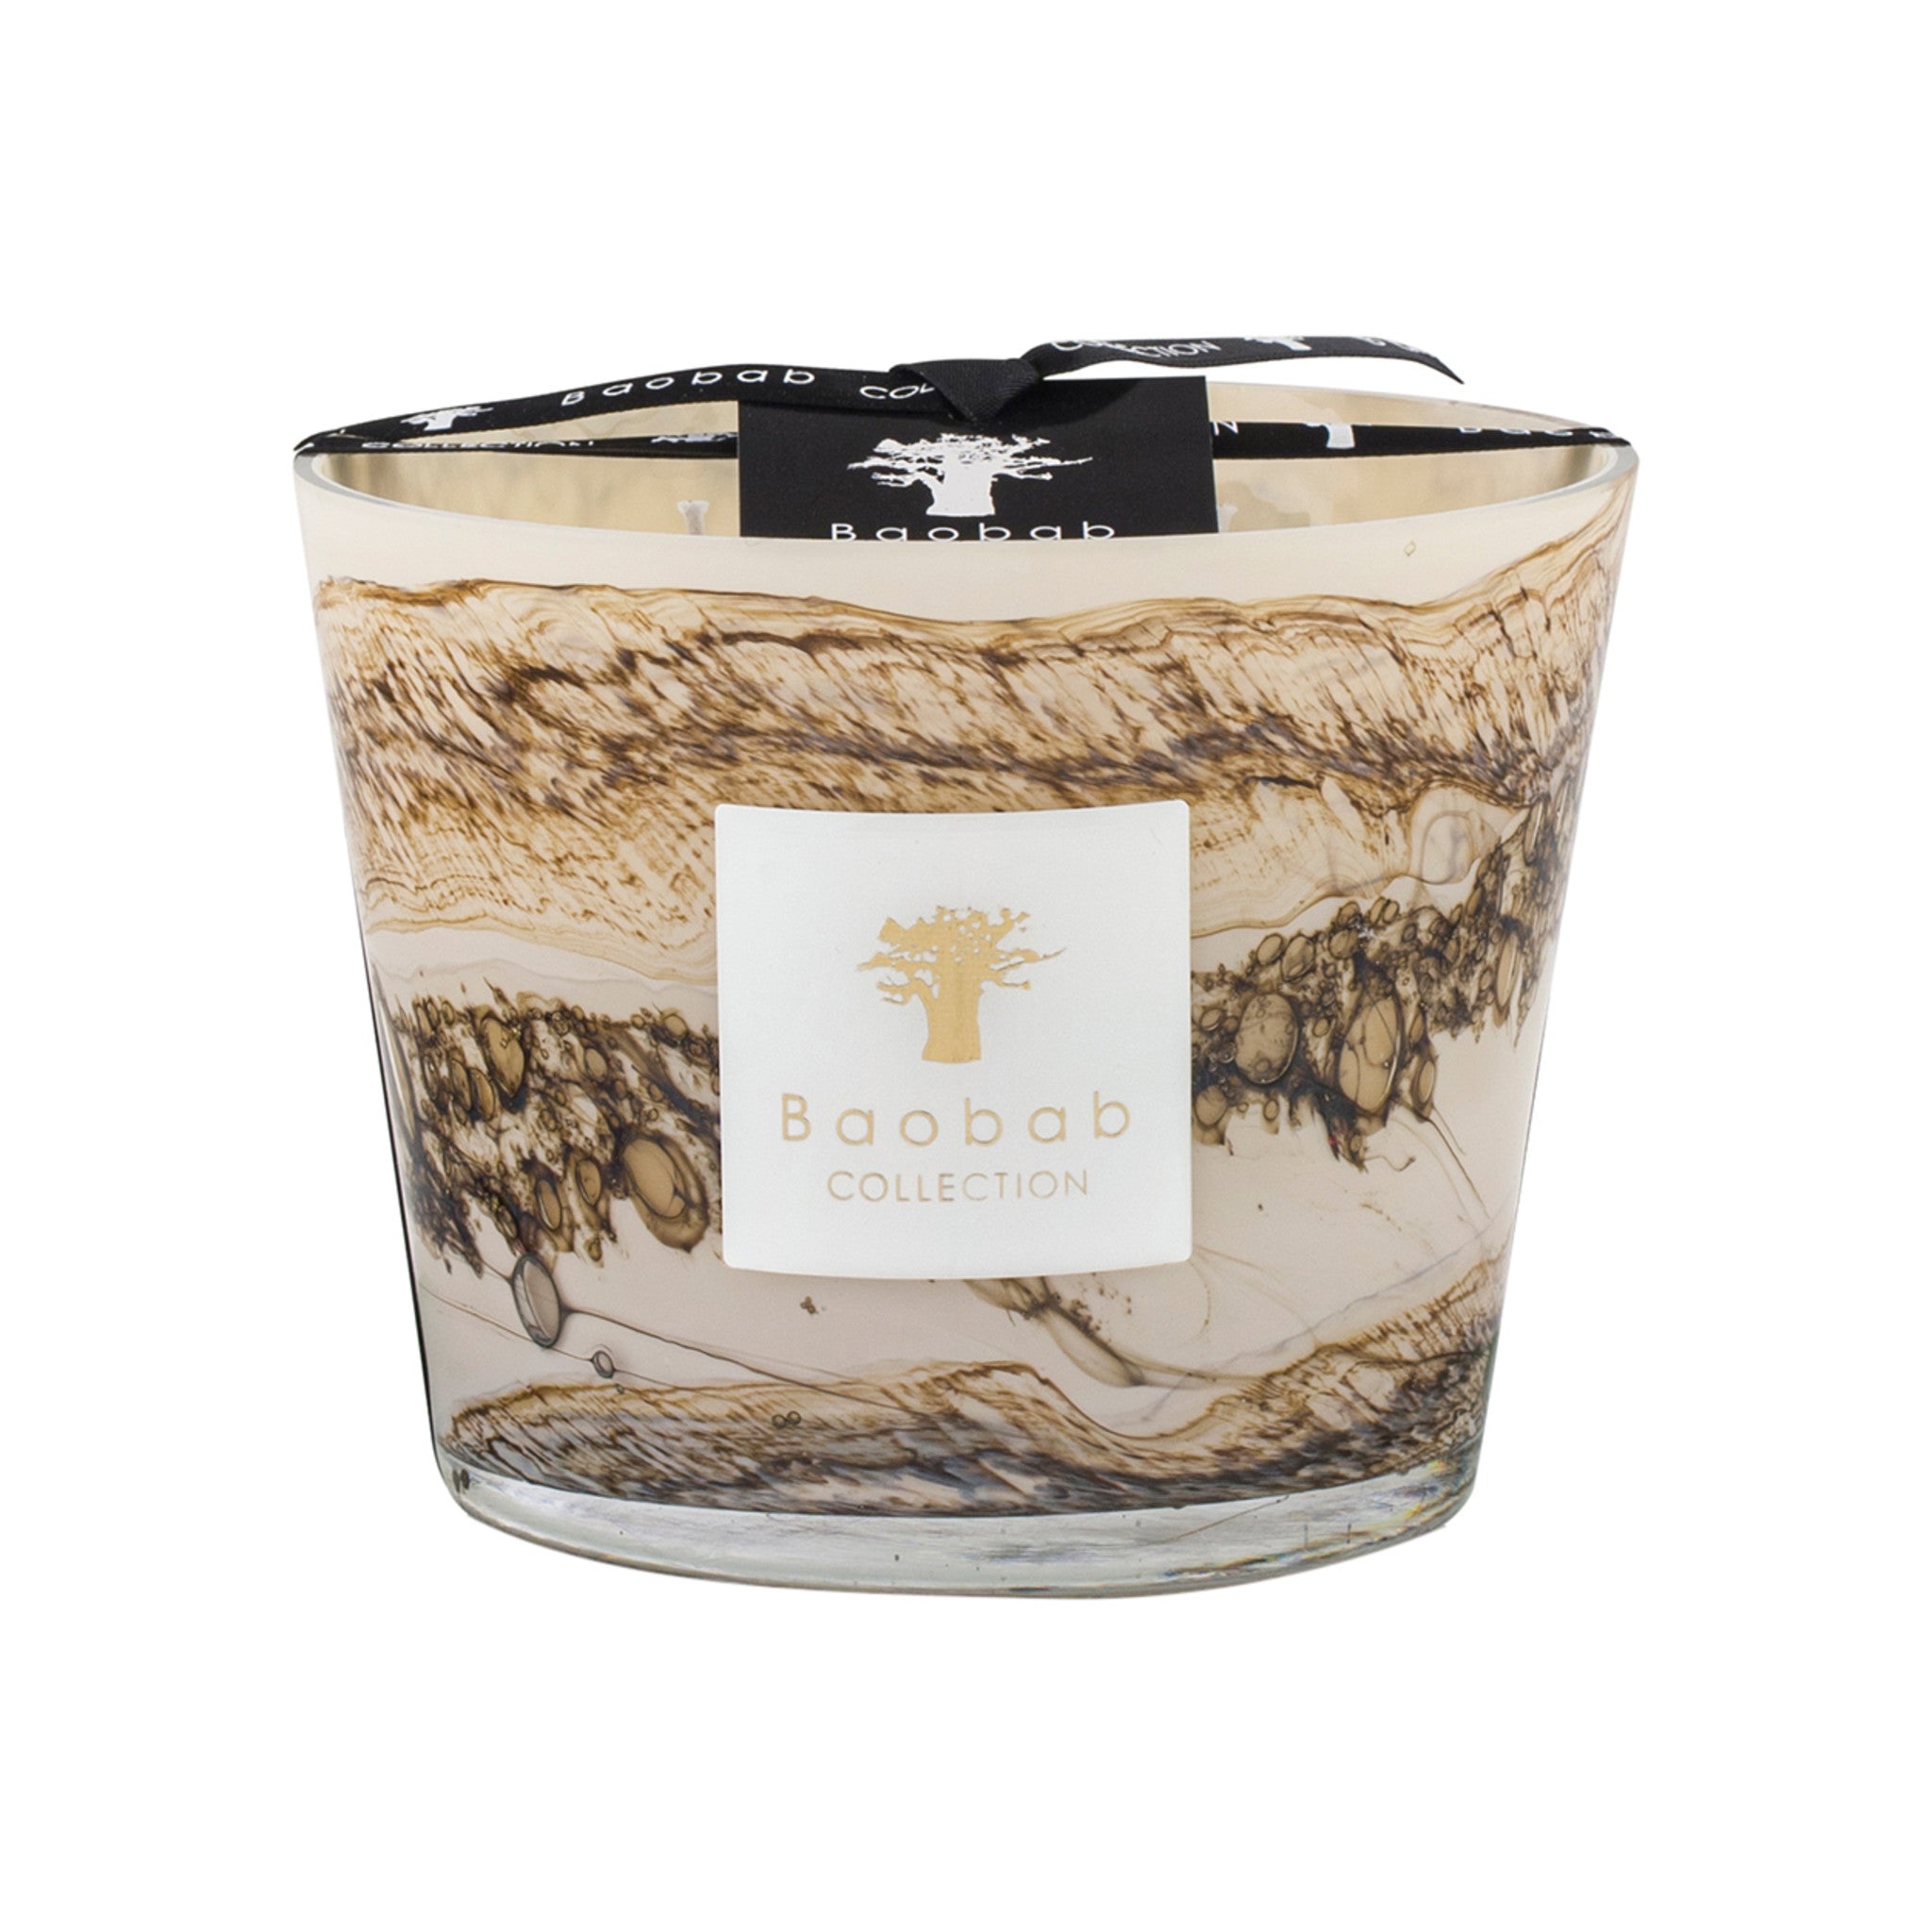 Baobab Collection Sand Siloli Candle Size variant: 2.53 lb (Max 10) main image.